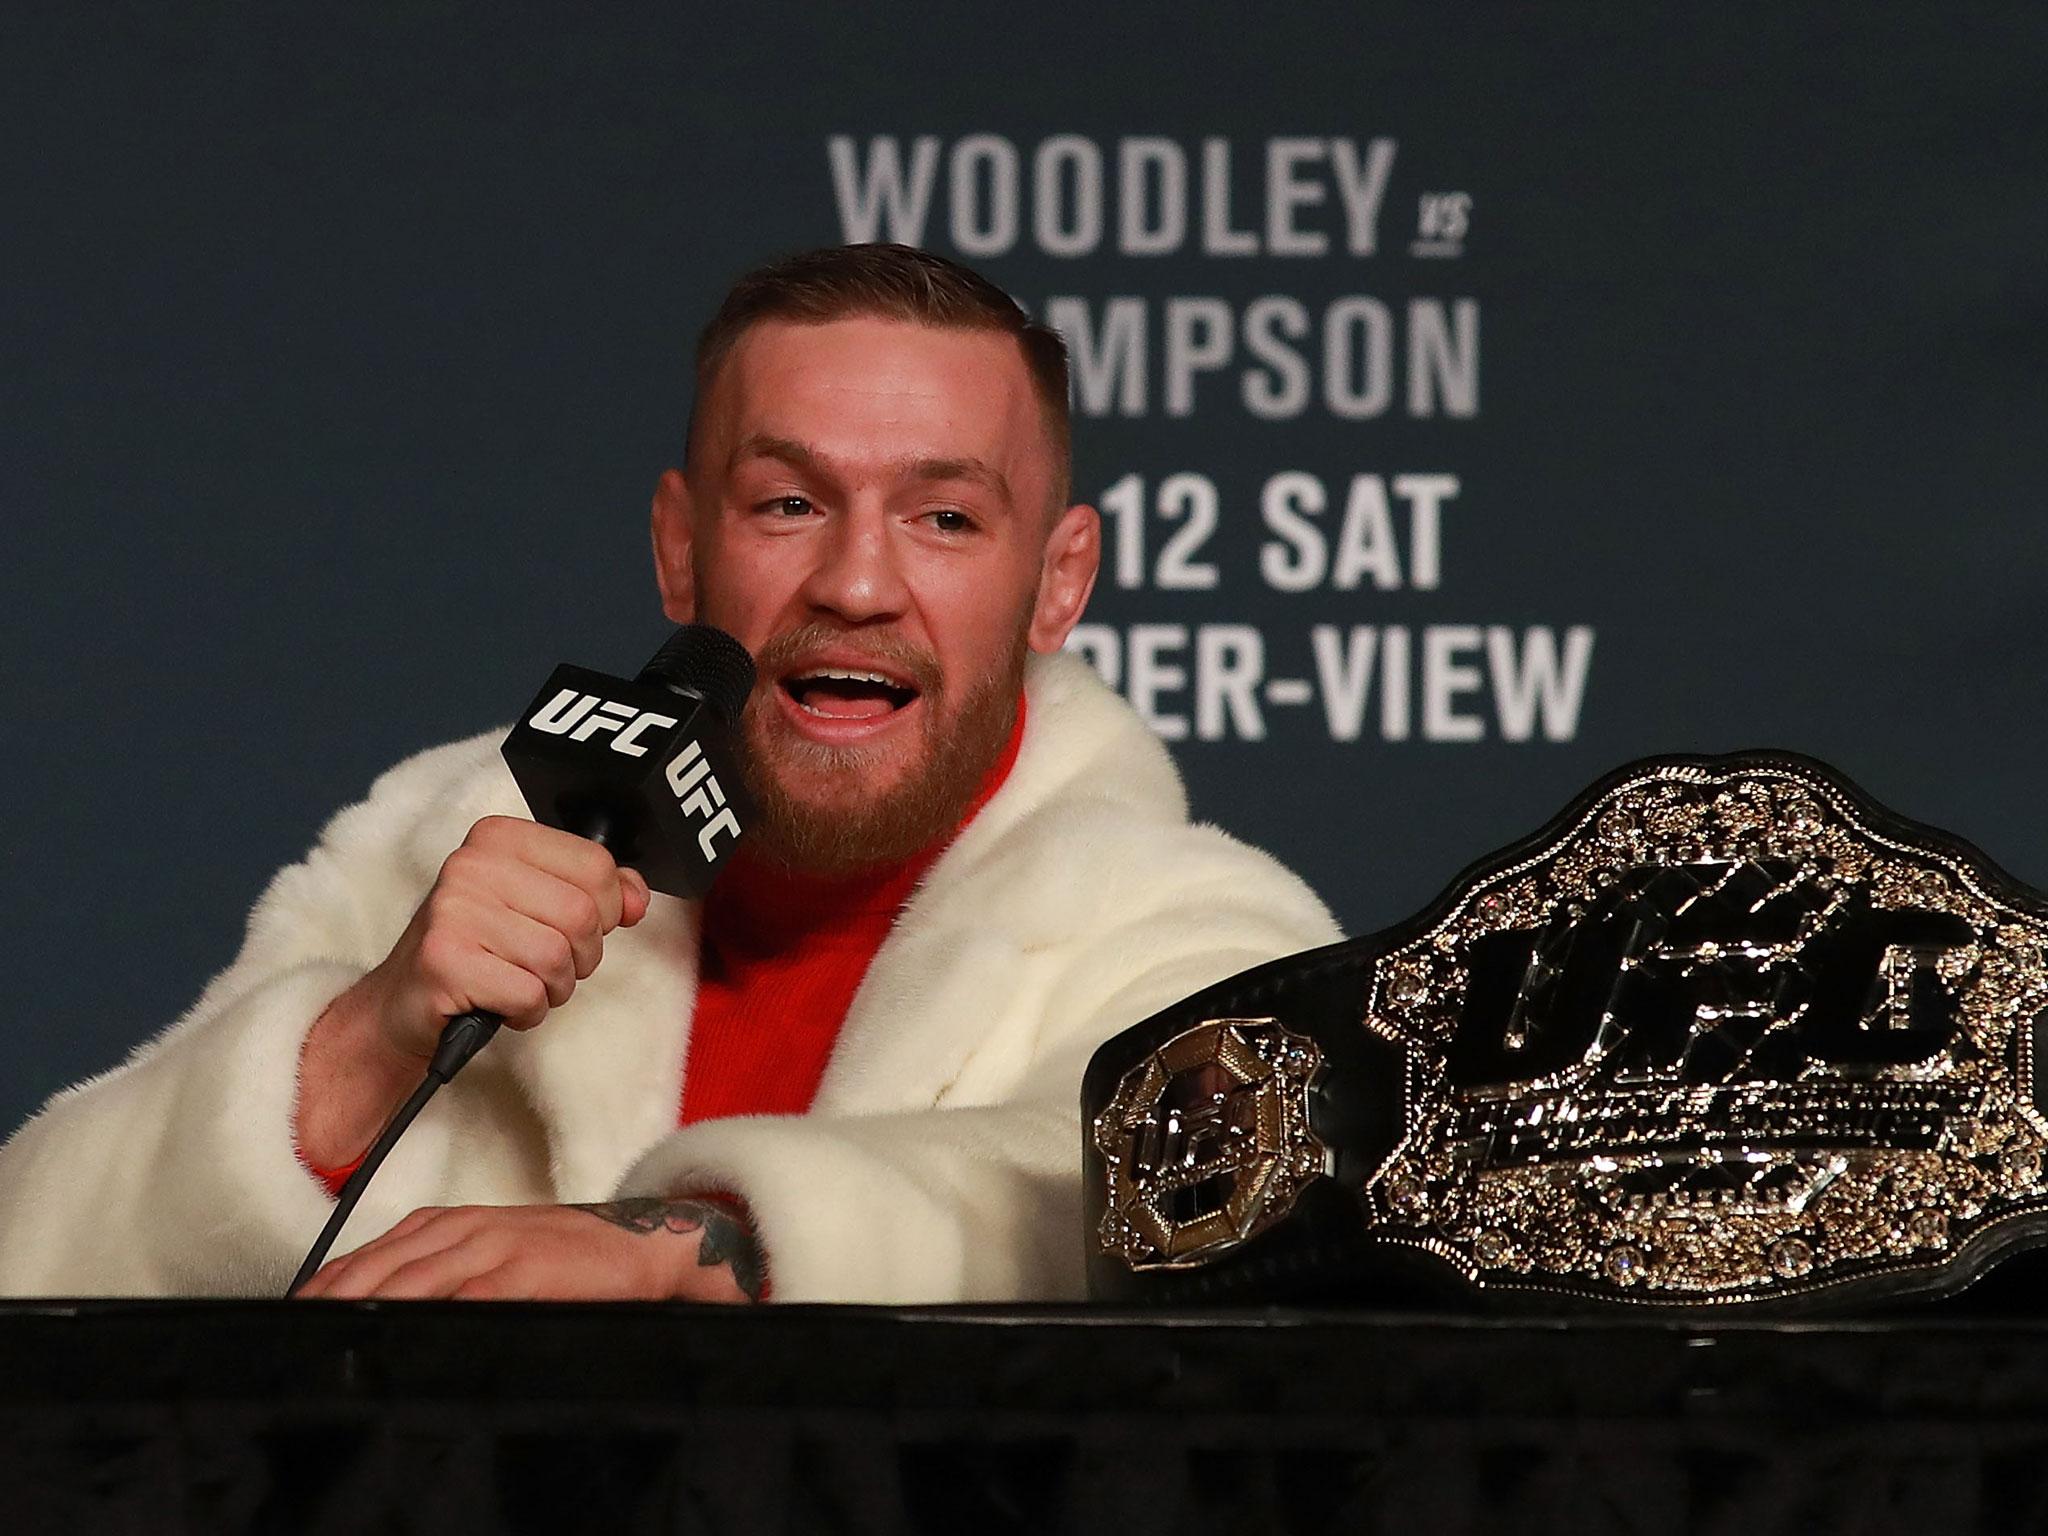 &#13;
McGregor is the most recognisable name in mixed martial arts &#13;